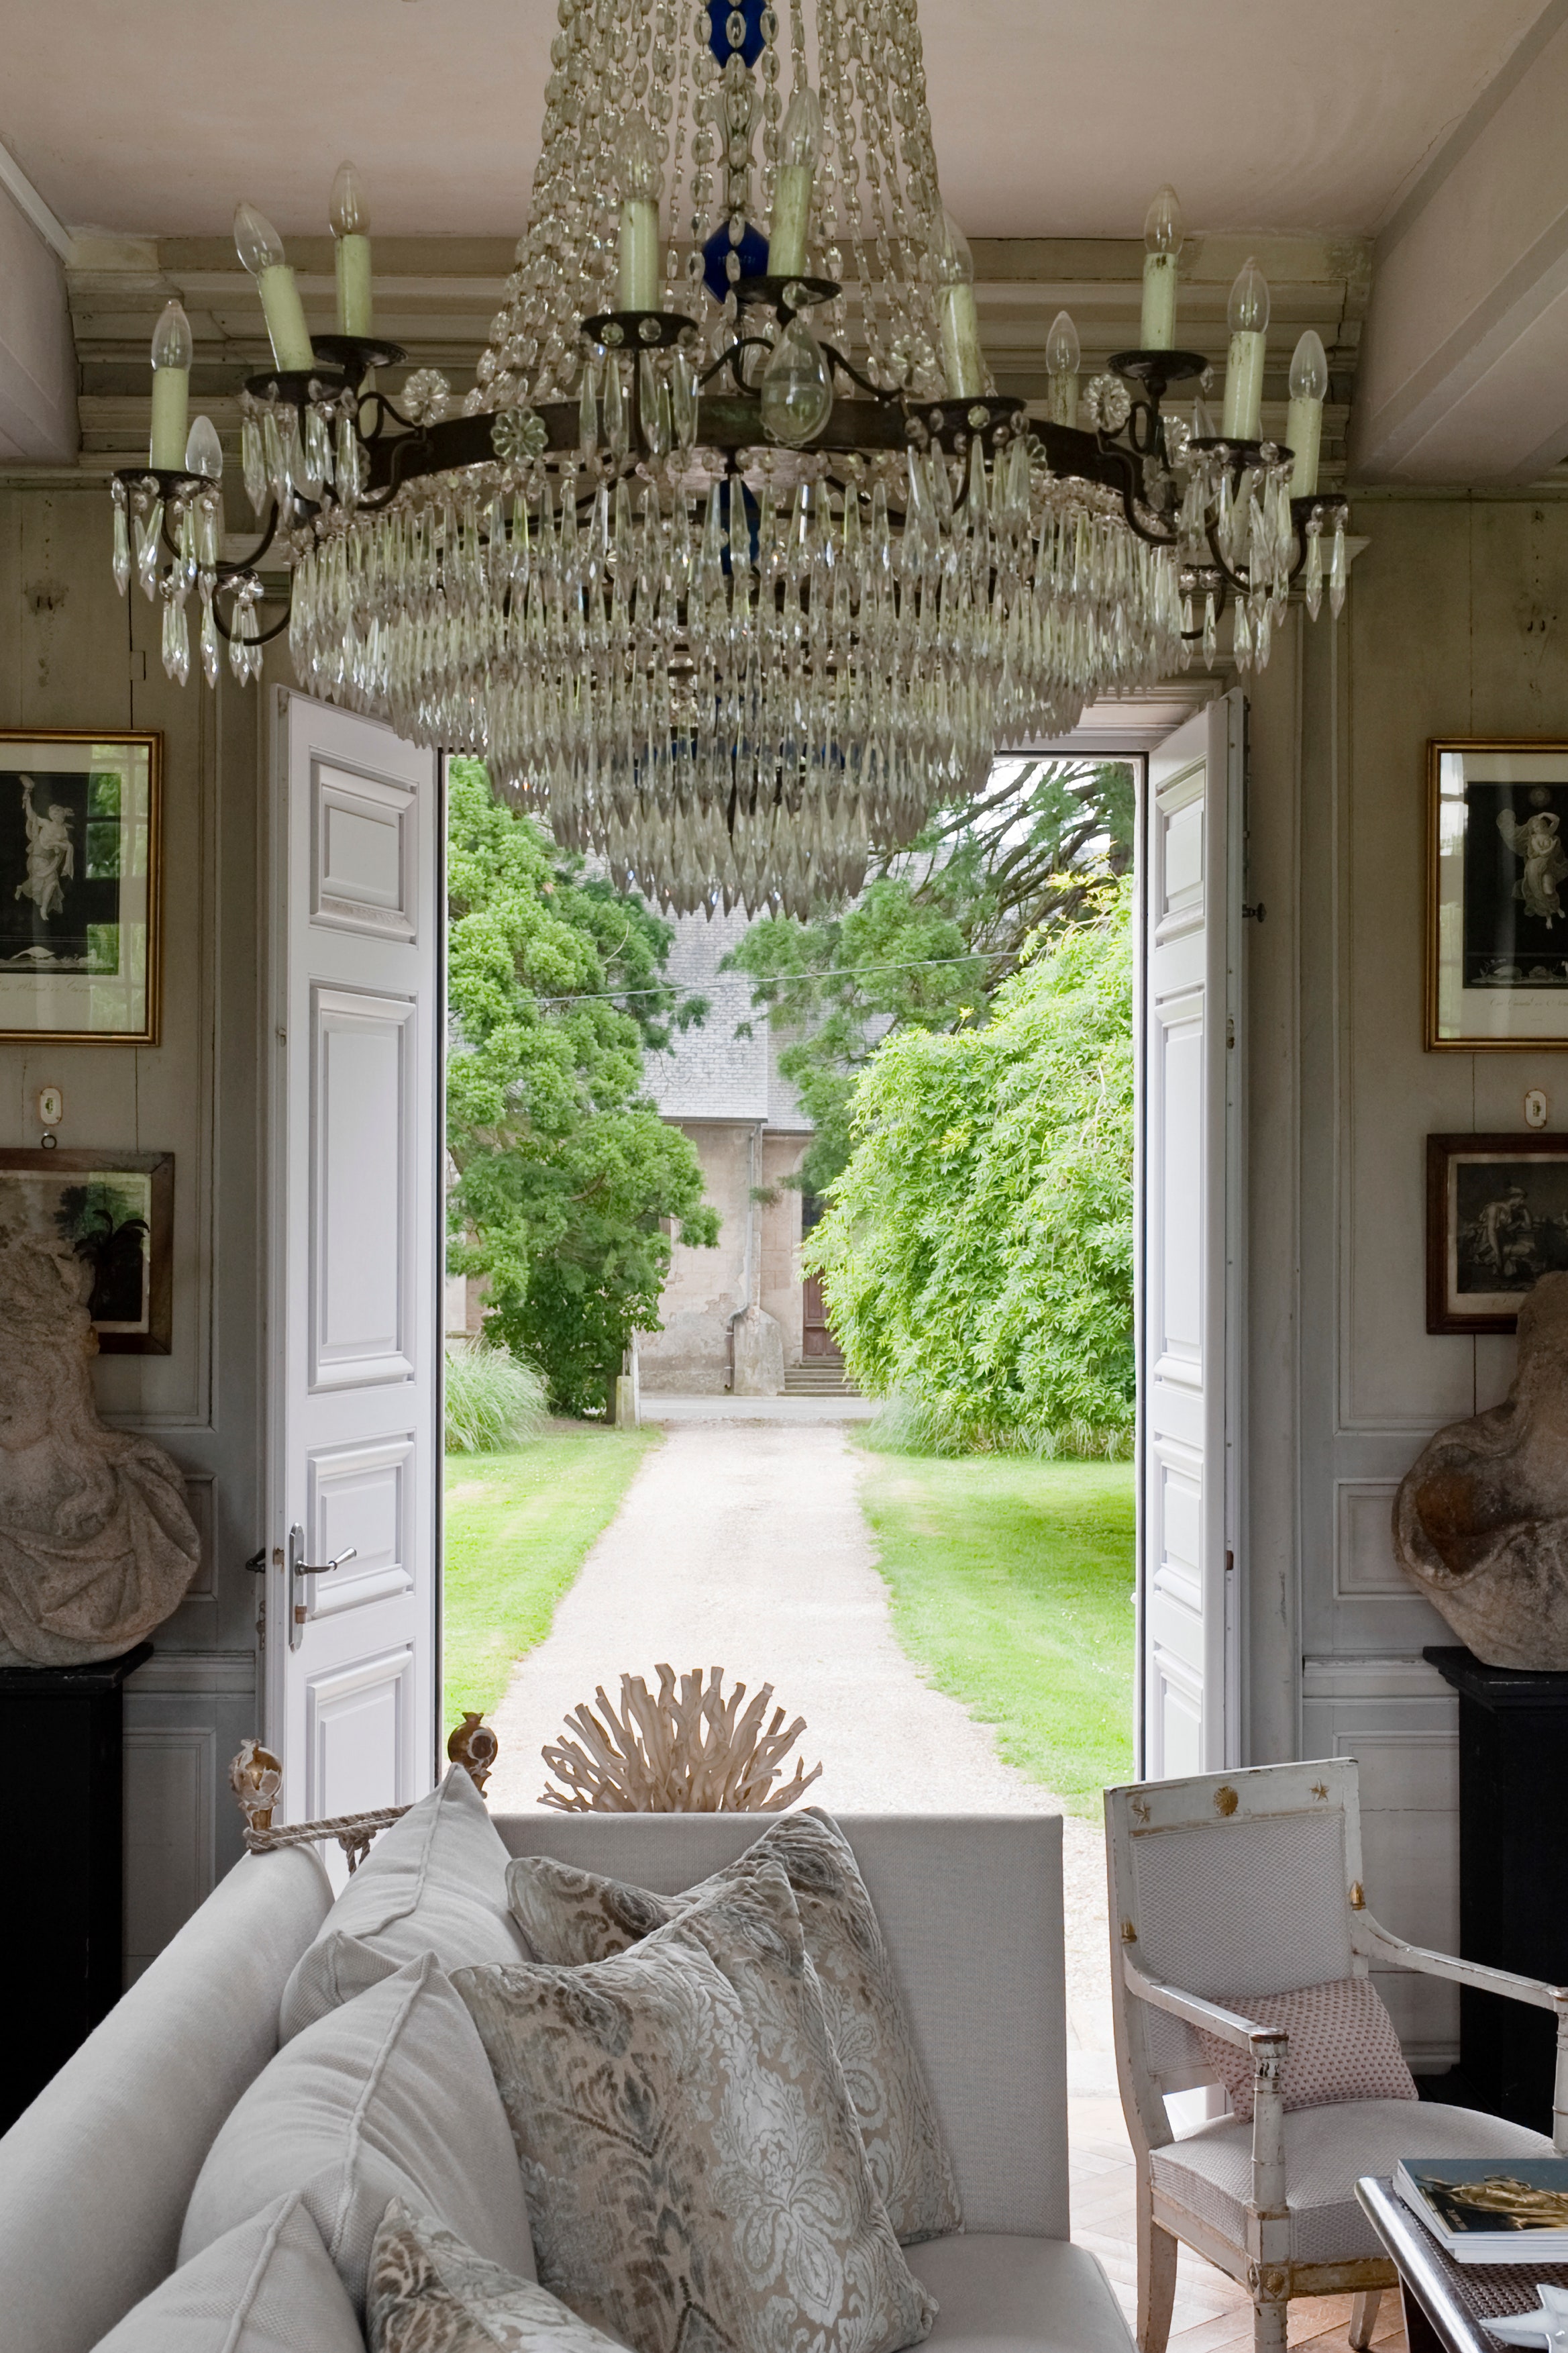 18C chandelier in sitting room furnished with french antiques stone busts and with french doors leading out to the garden